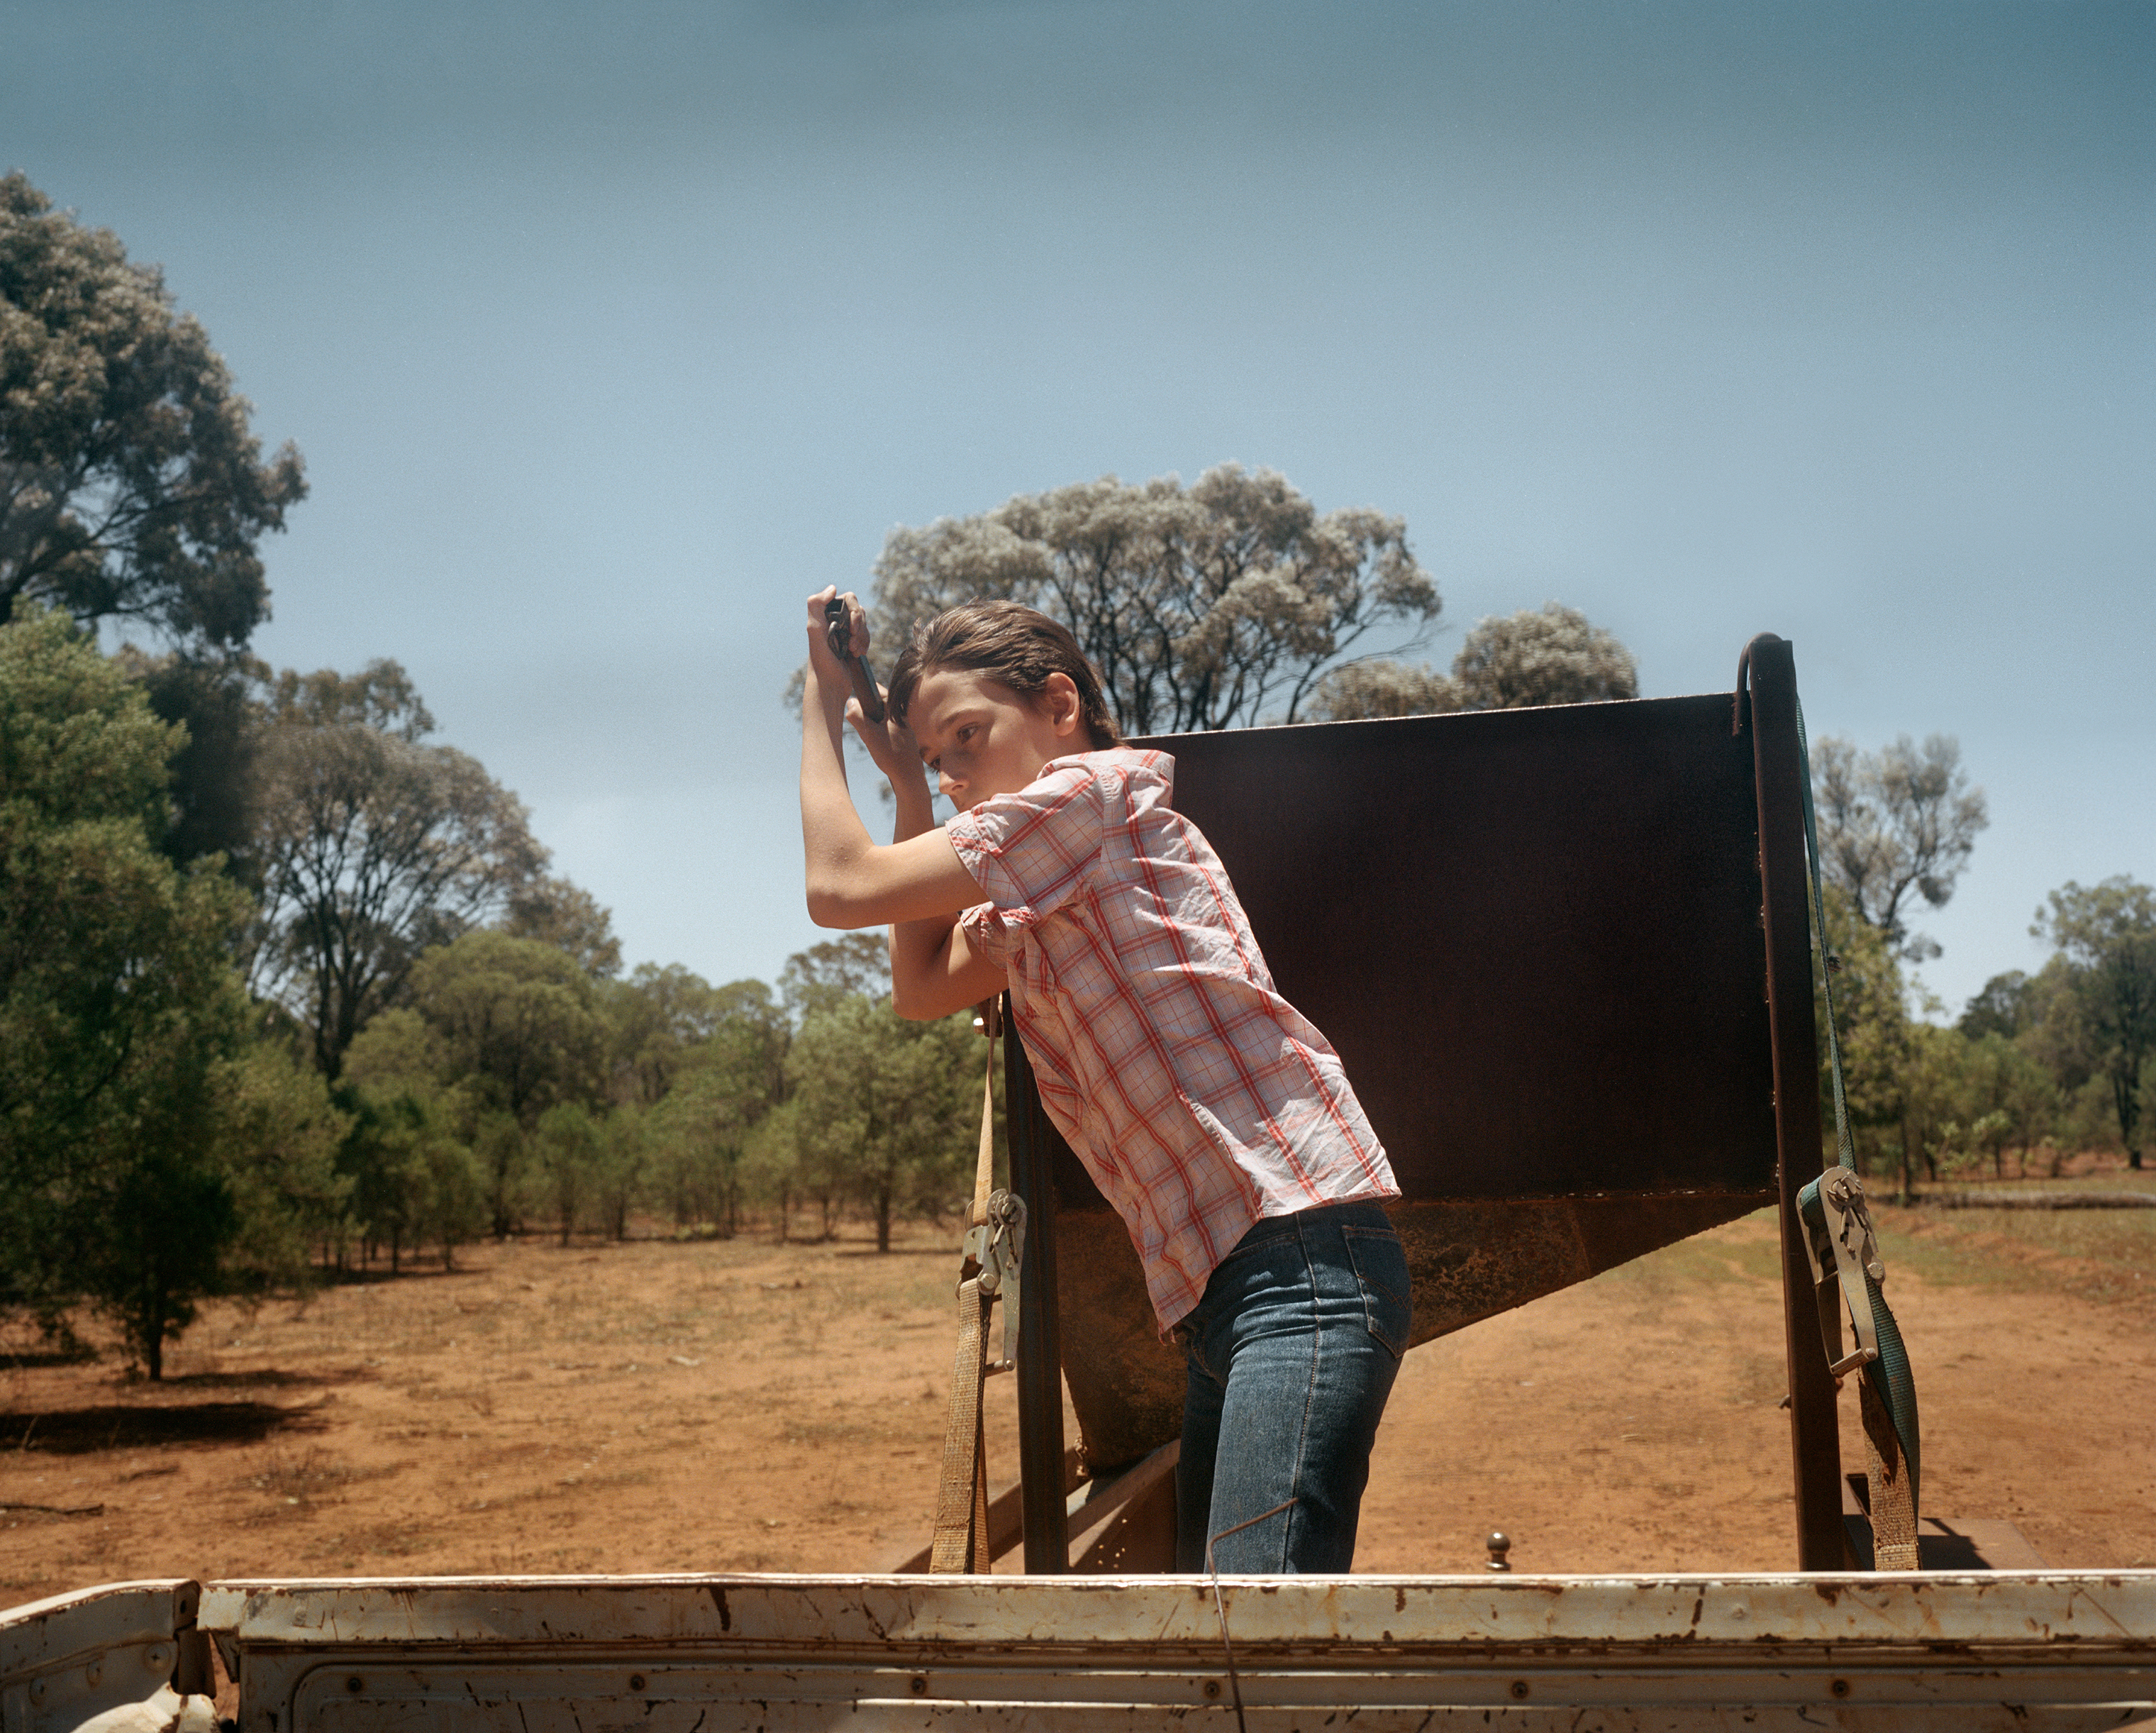 Nicholas Clark, 12, releases feed for sheep on Kandimulla Property in Queensland in November. Without an ability to grow food naturally, Kandimulla owner Kent Morris is forced to buy food to feed his livestock. (Adam Ferguson for TIME)